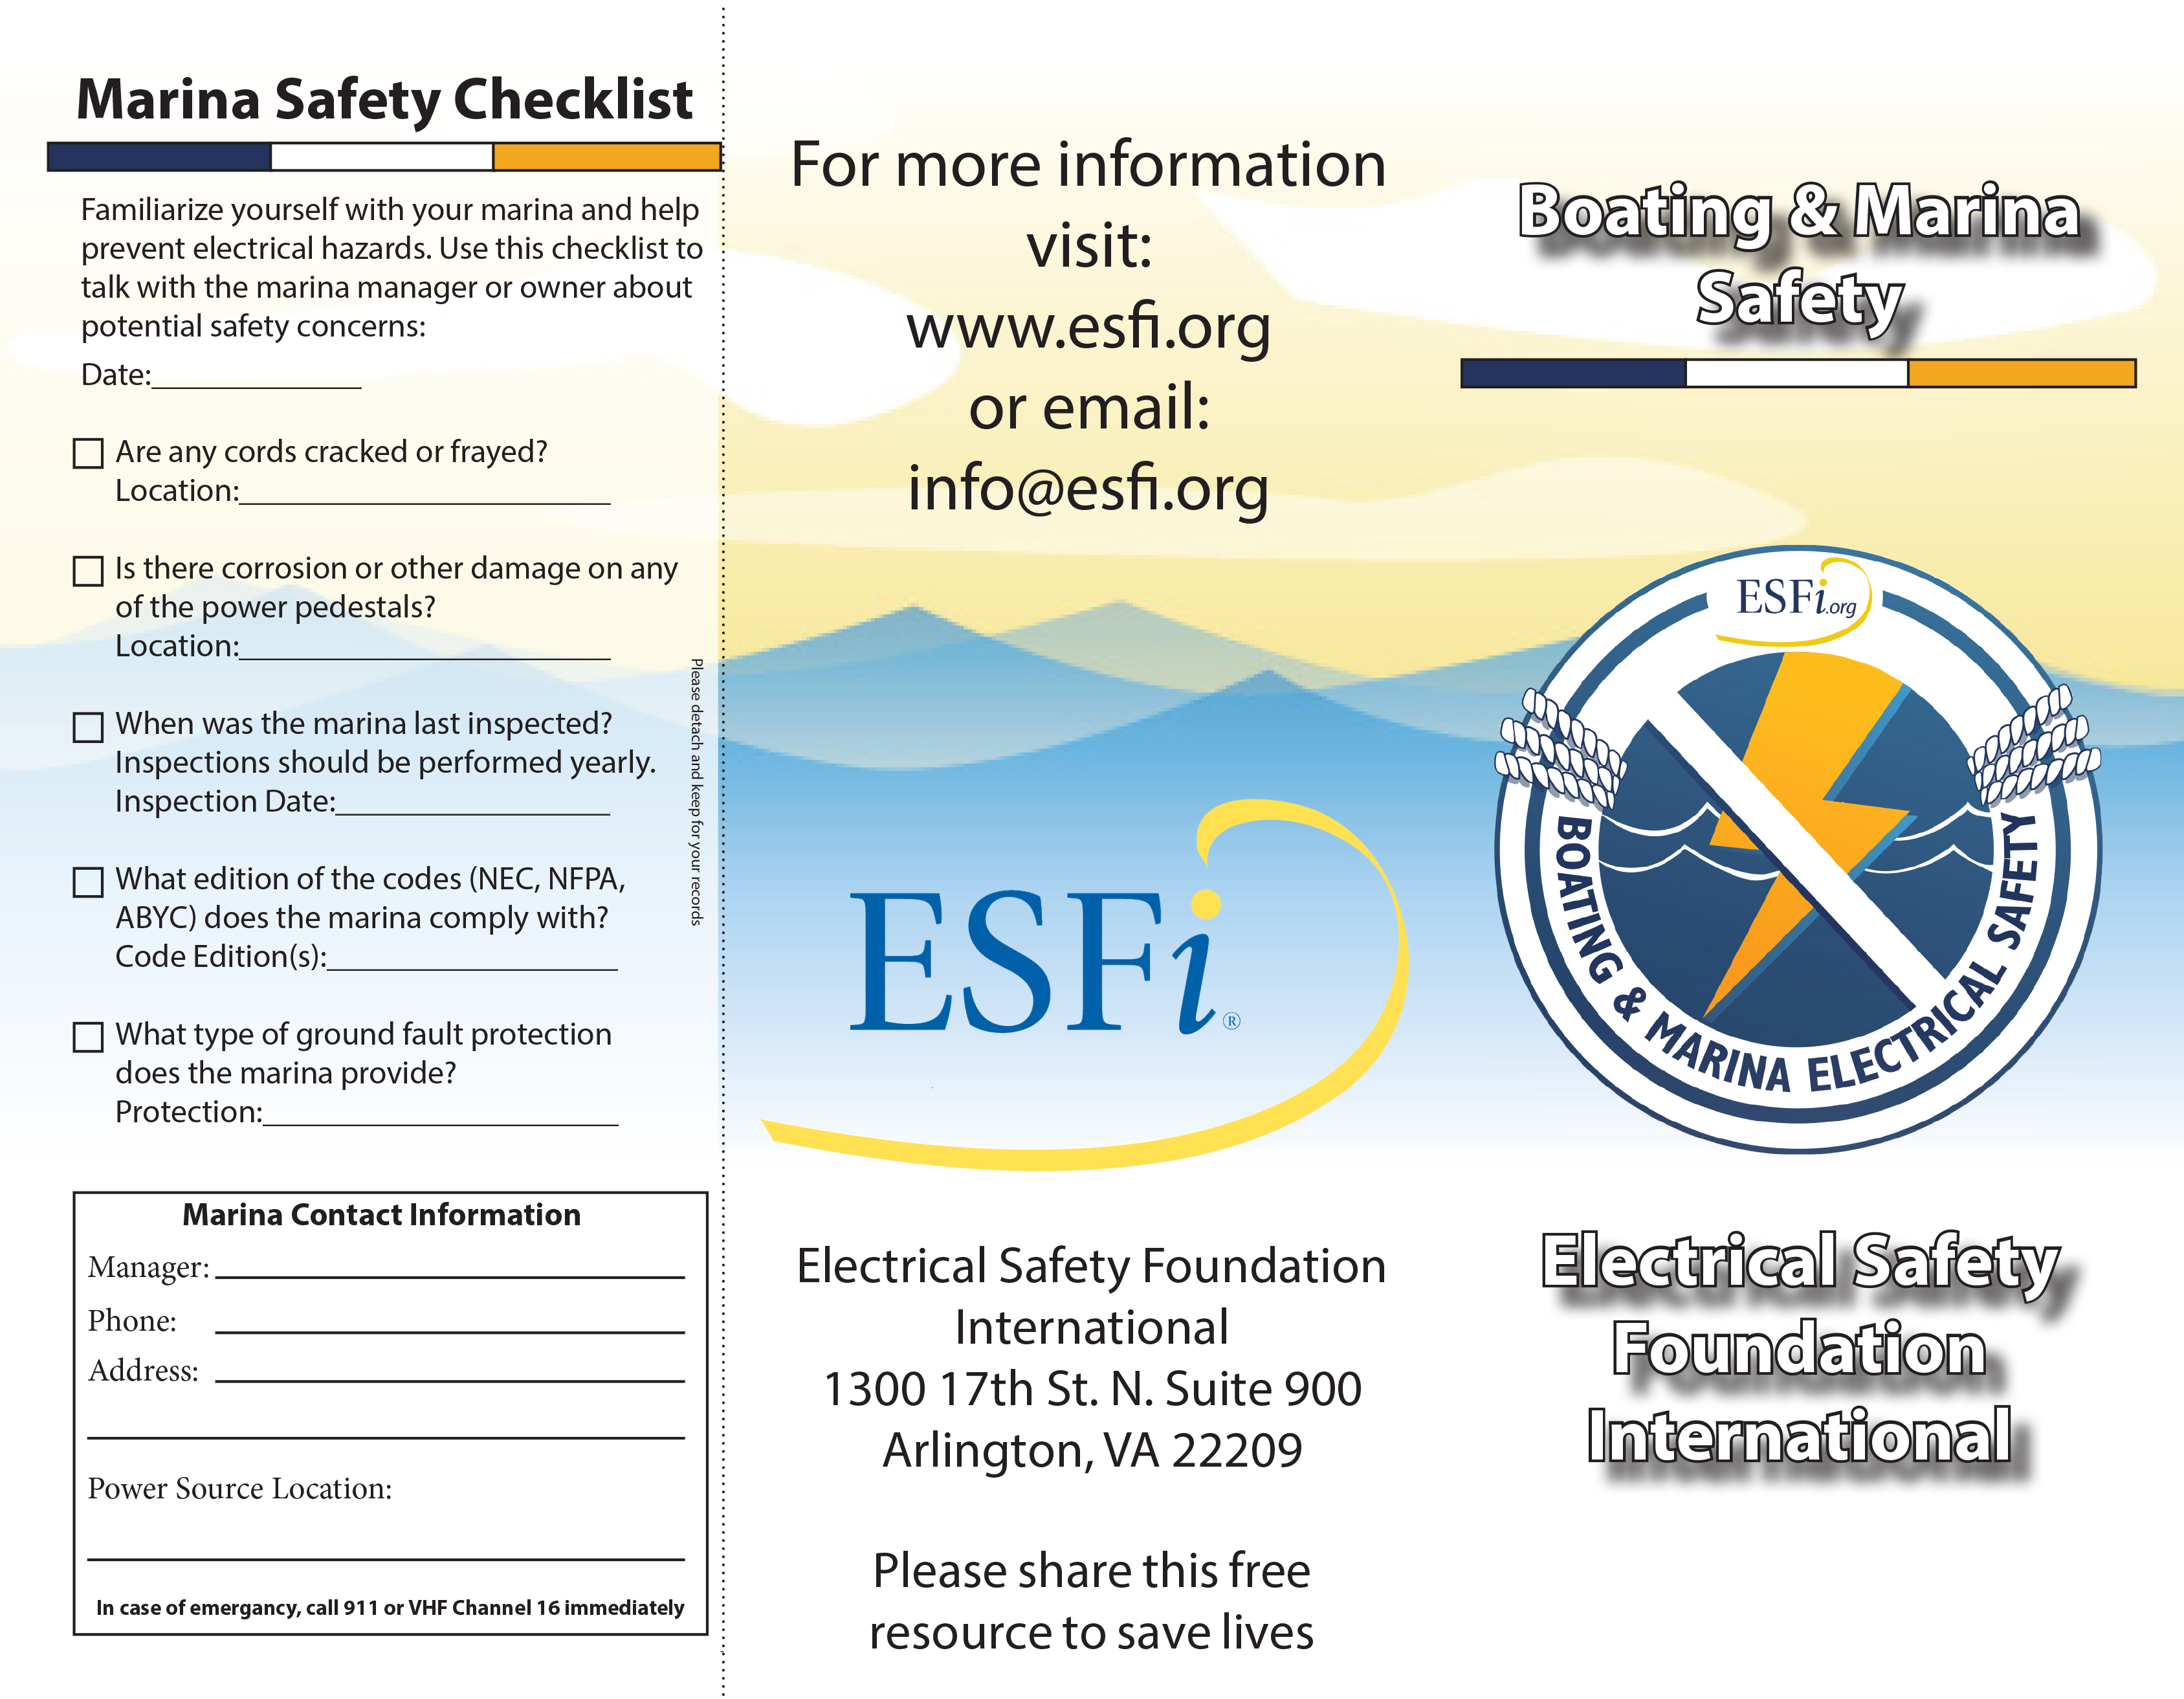 Boating and Marina Safety Brochure - Electrical Safety Foundation